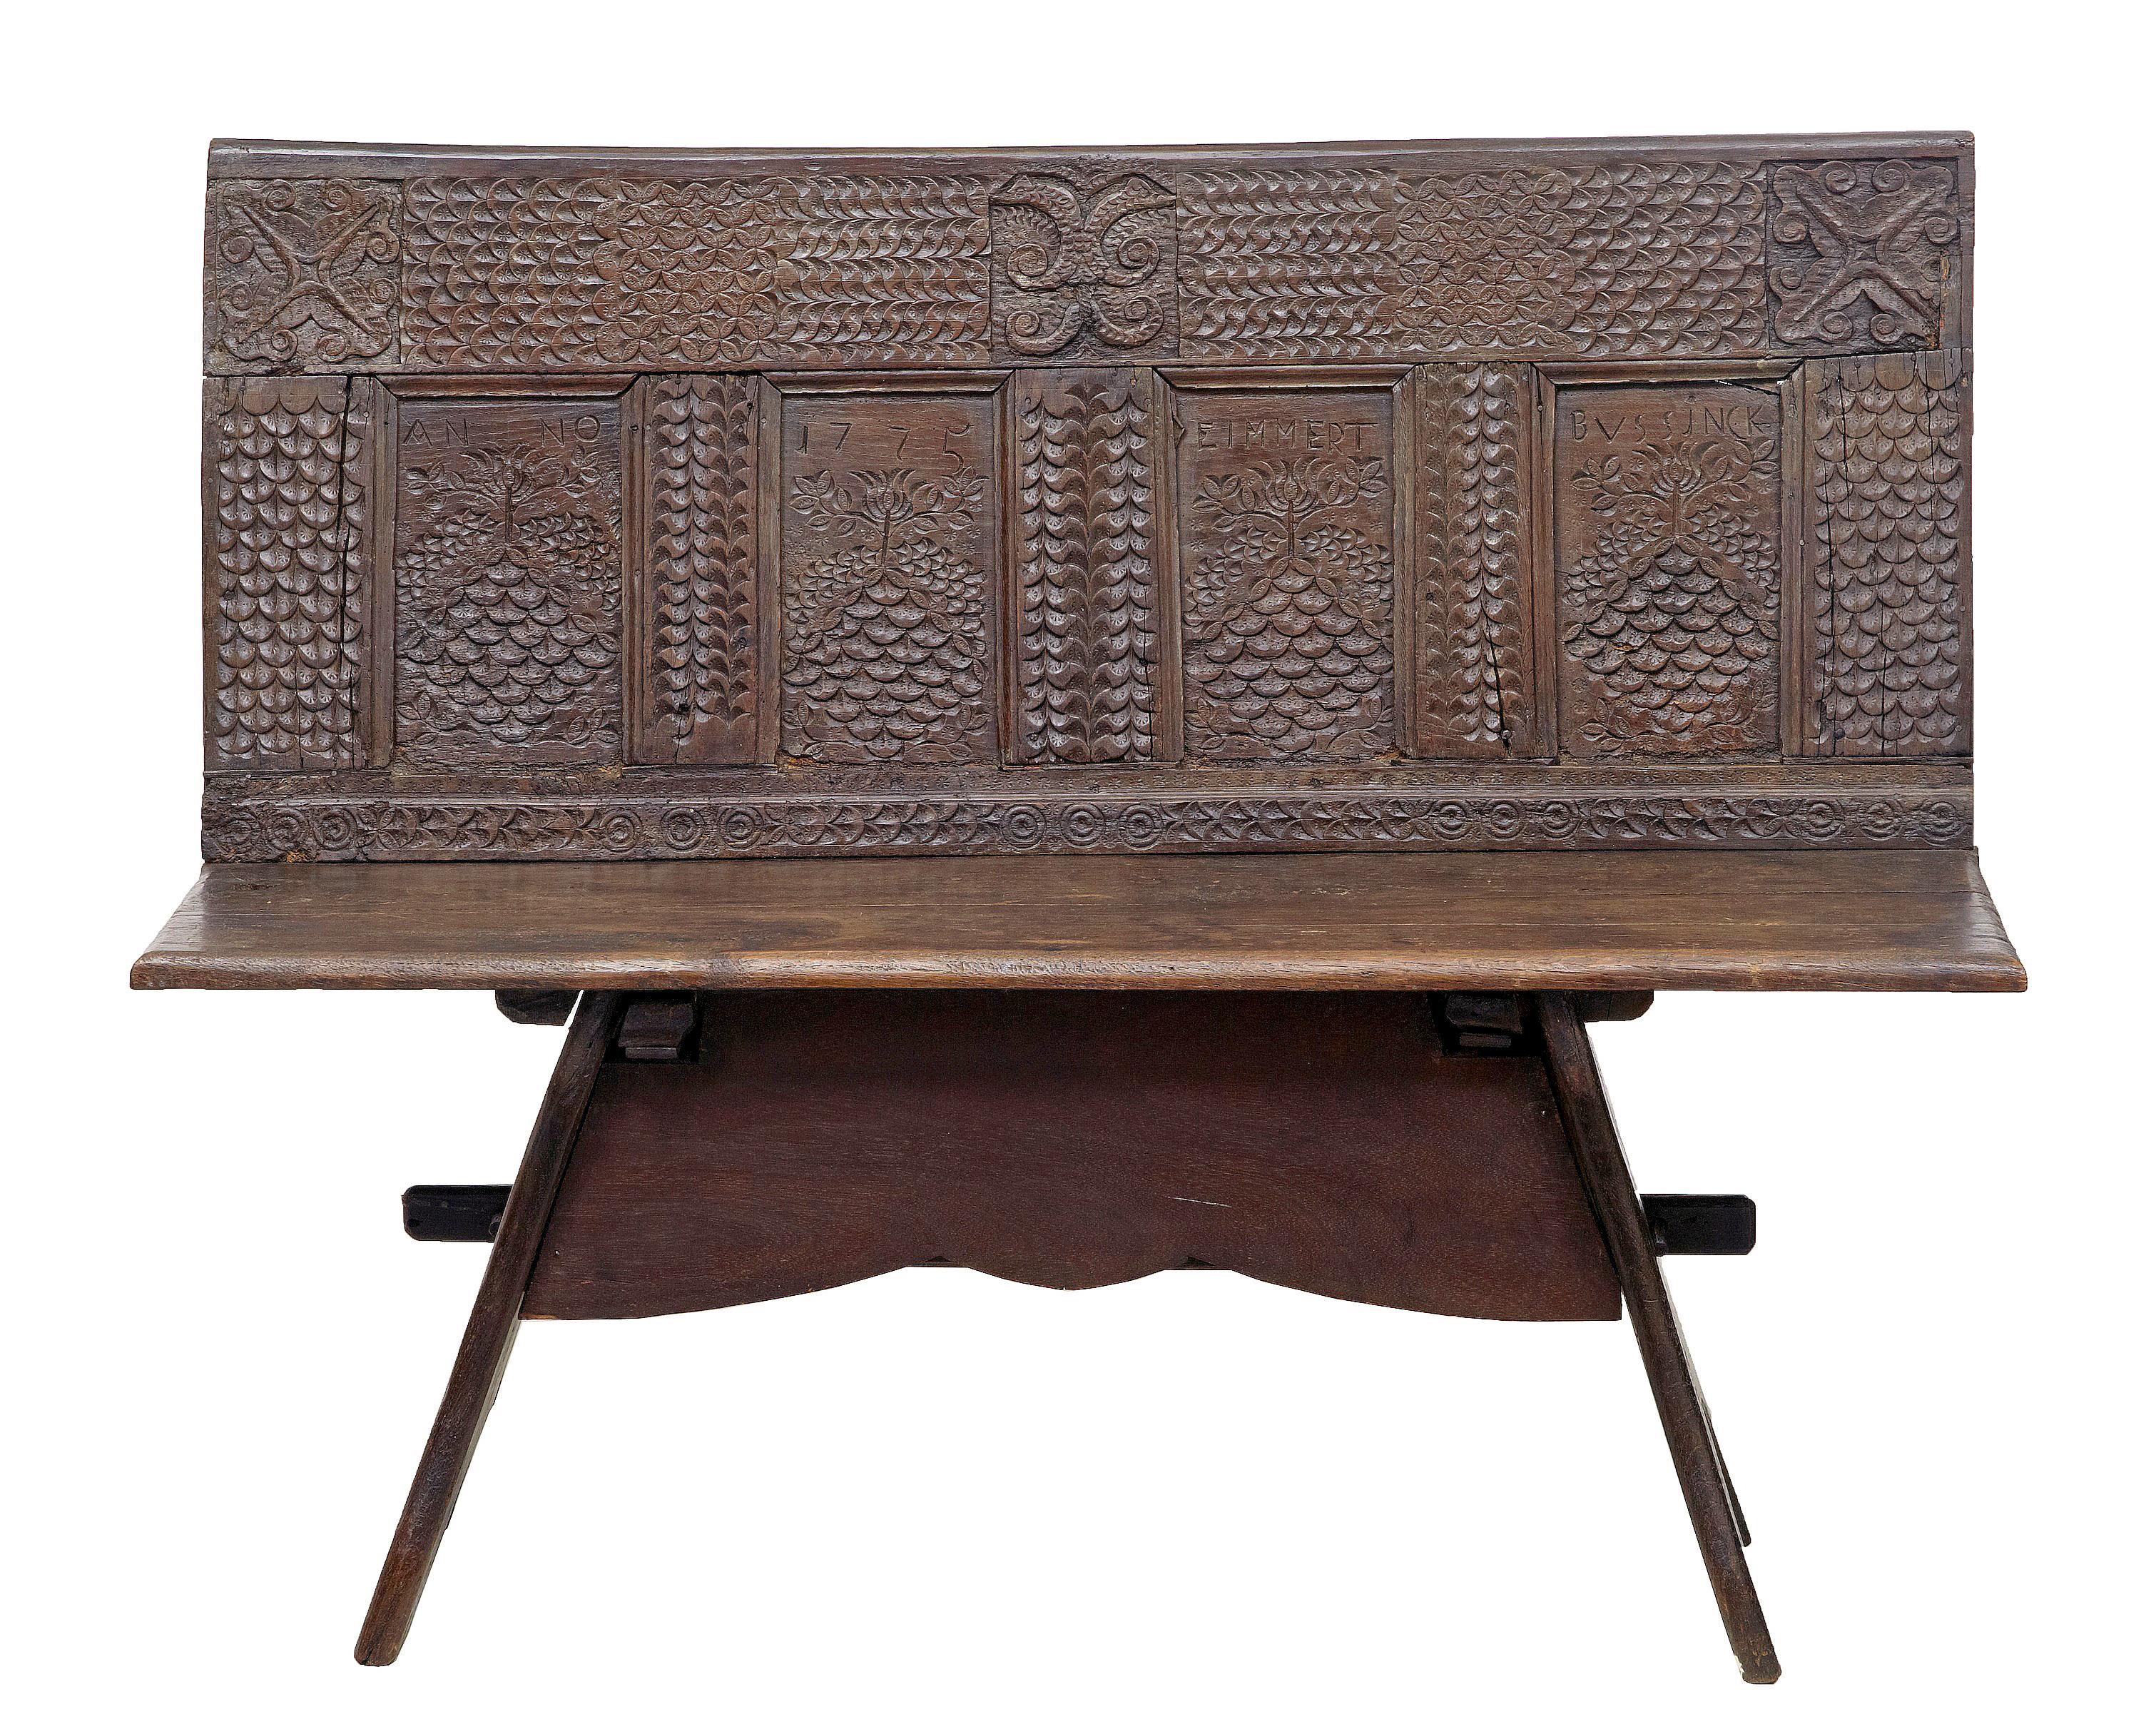 19th century Victorian carved oak bench circa 1880.

Victorian bench made from earlier elements. Pegged base supports elements from an 18th century coffer, which was normal re birth of furniture by the victorians.

Age splits to seat, expected